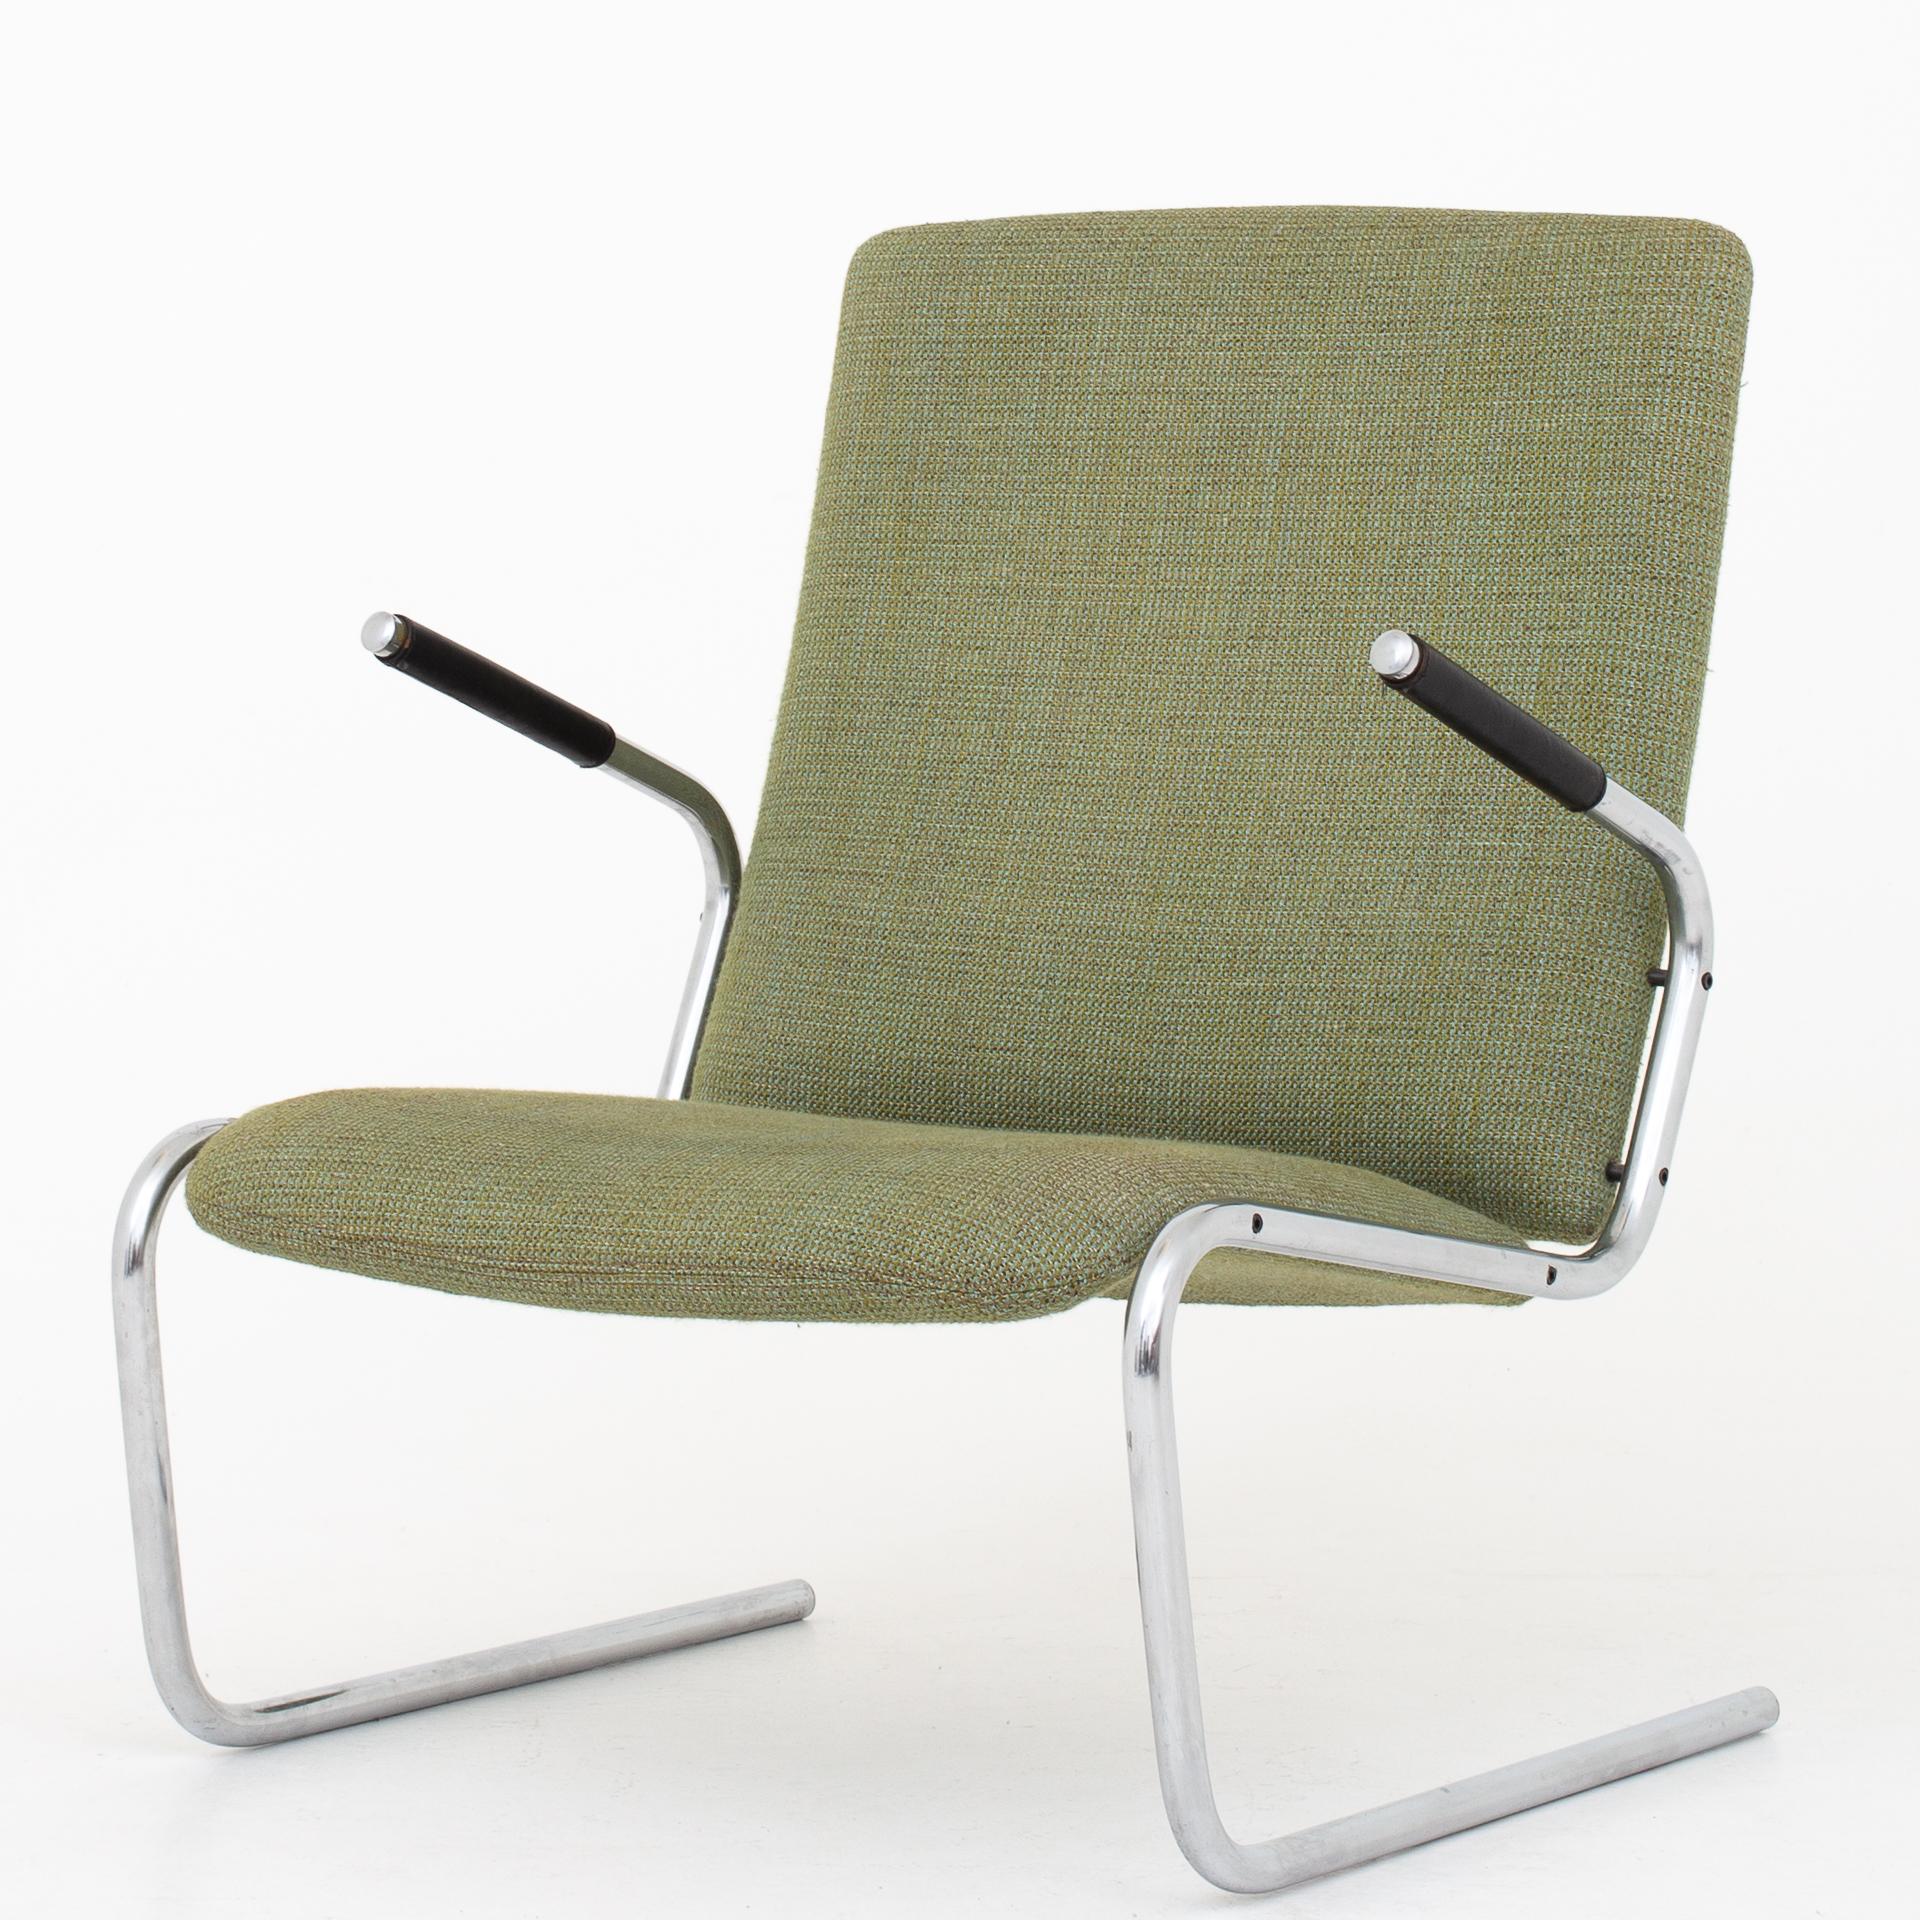 Easy chairs with a cantilever frame in chromed steel, upholstered in green wool with black leather armrests. Maker Kusch & Co.